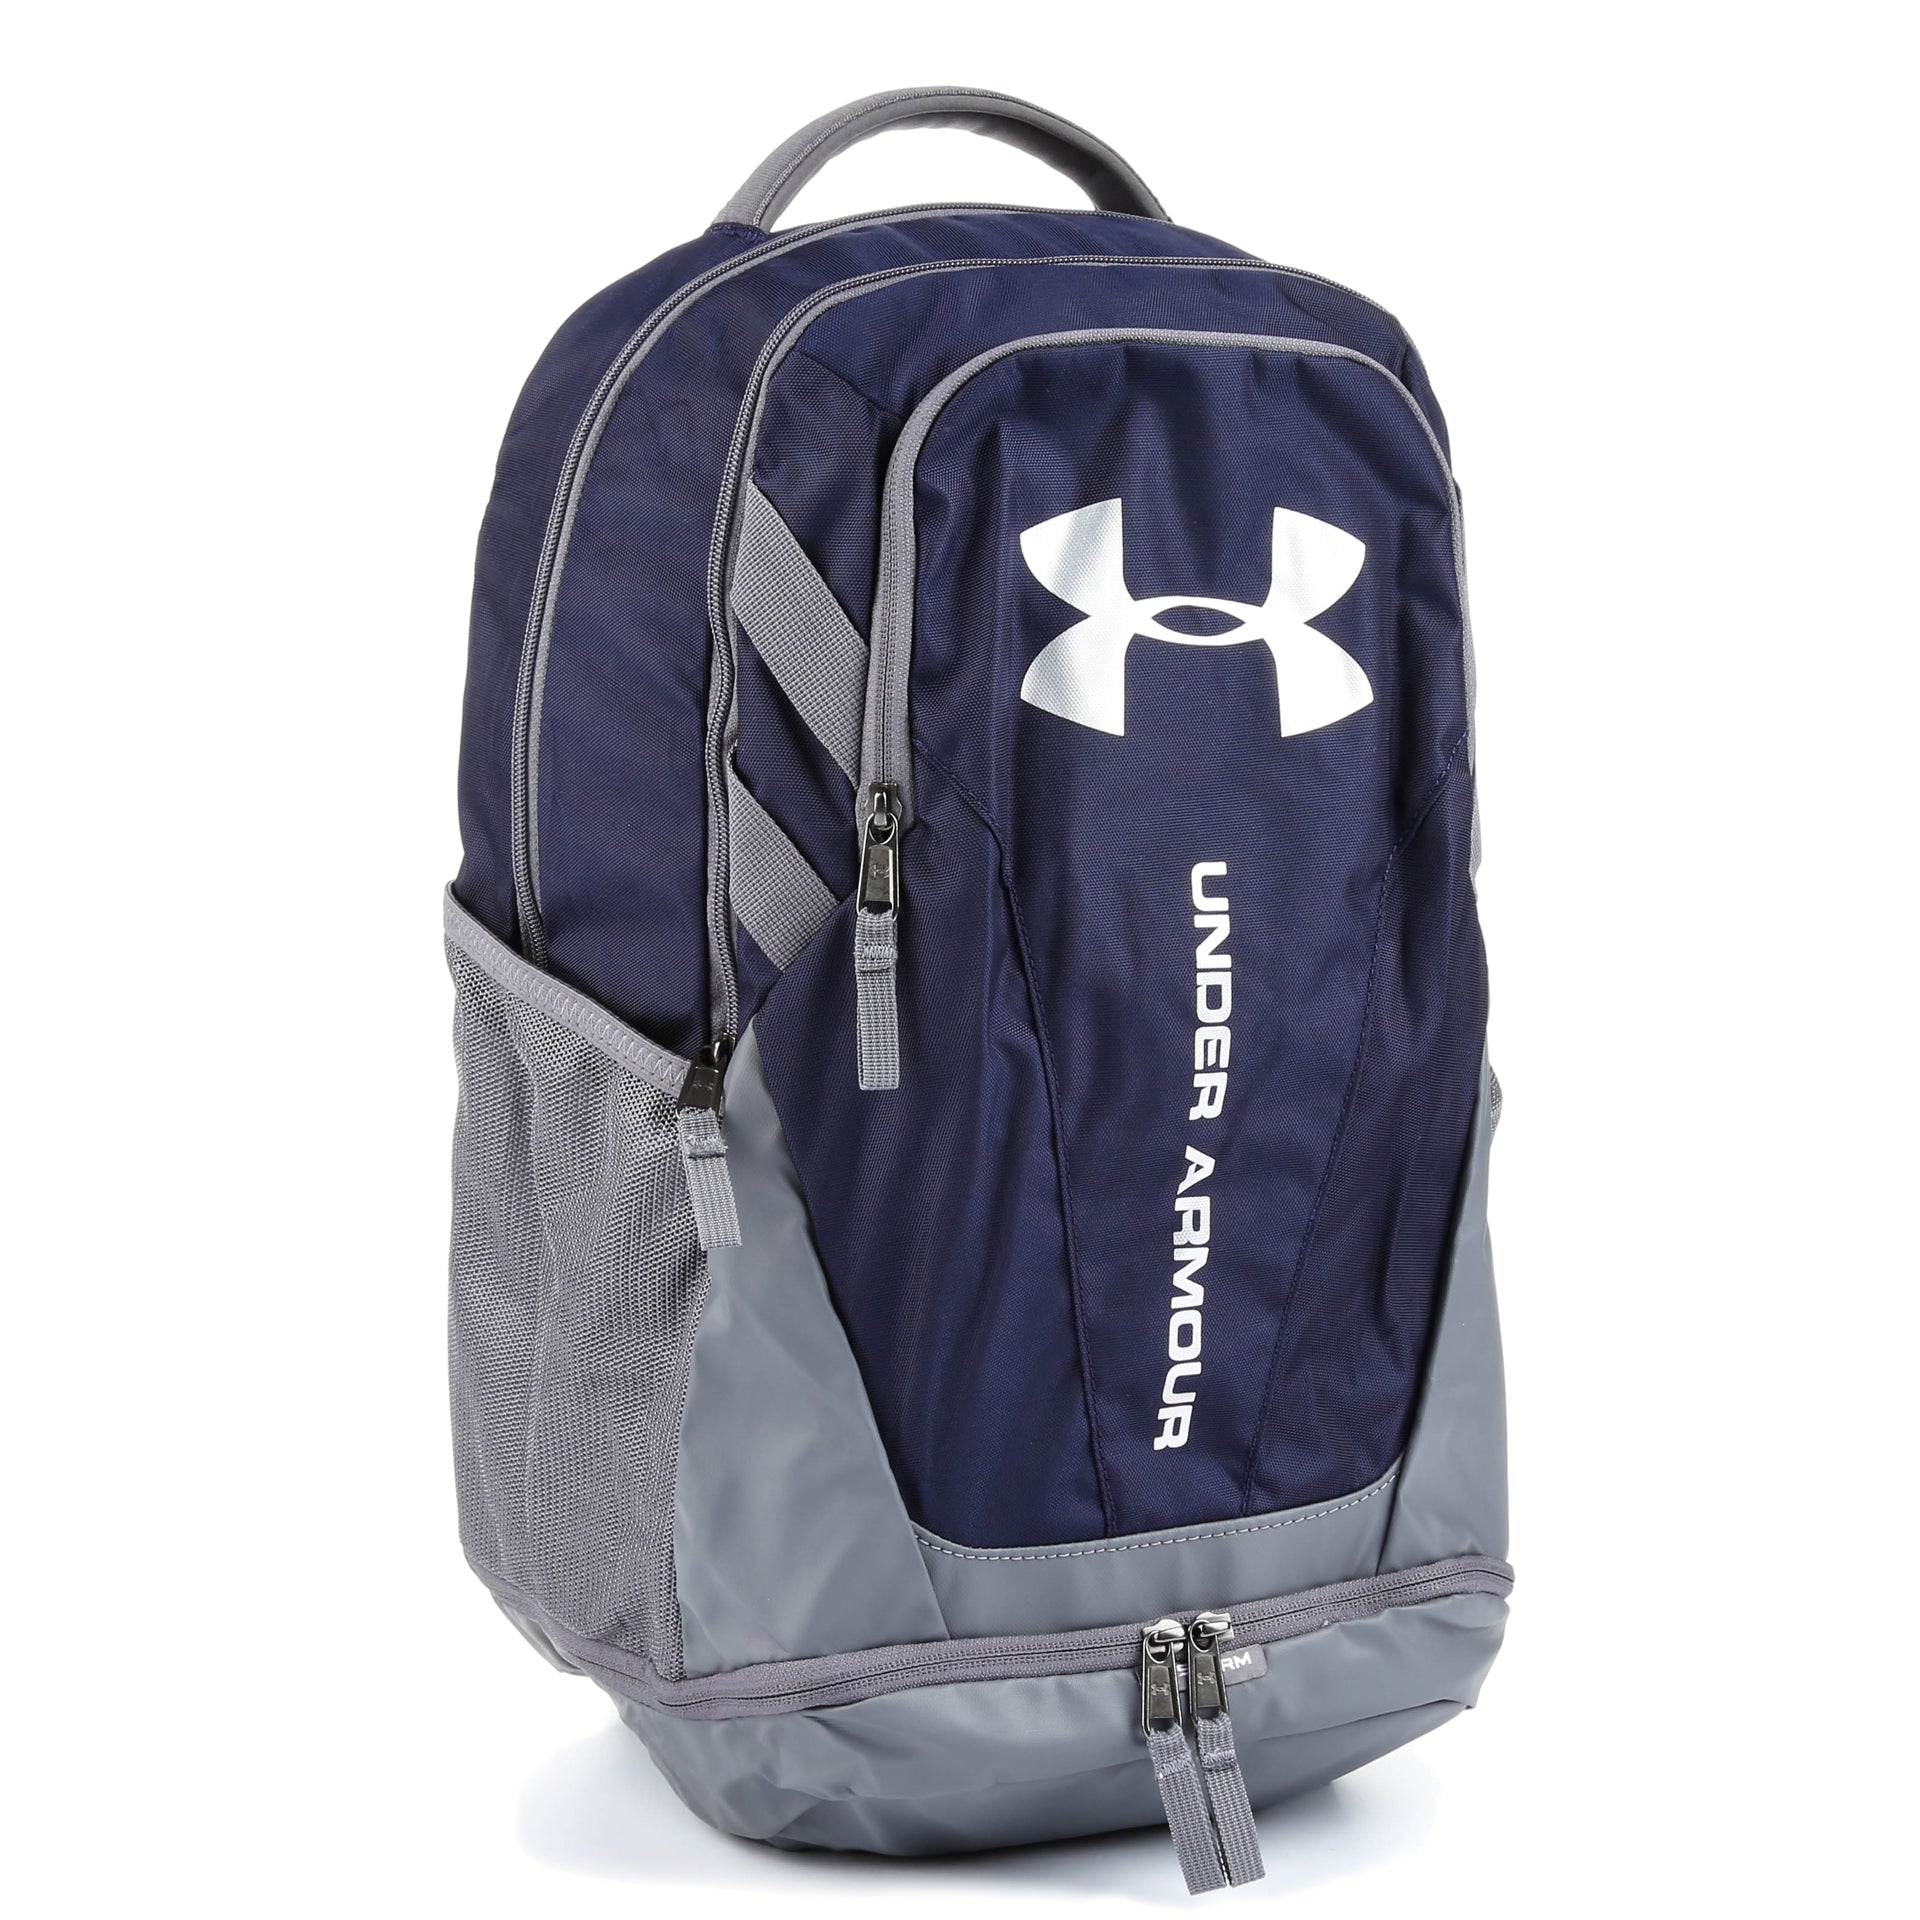 Grommen Mauve censuur Under Armour Hustle 3.0 Backpack - Midnight Navy / Graphite - New Star